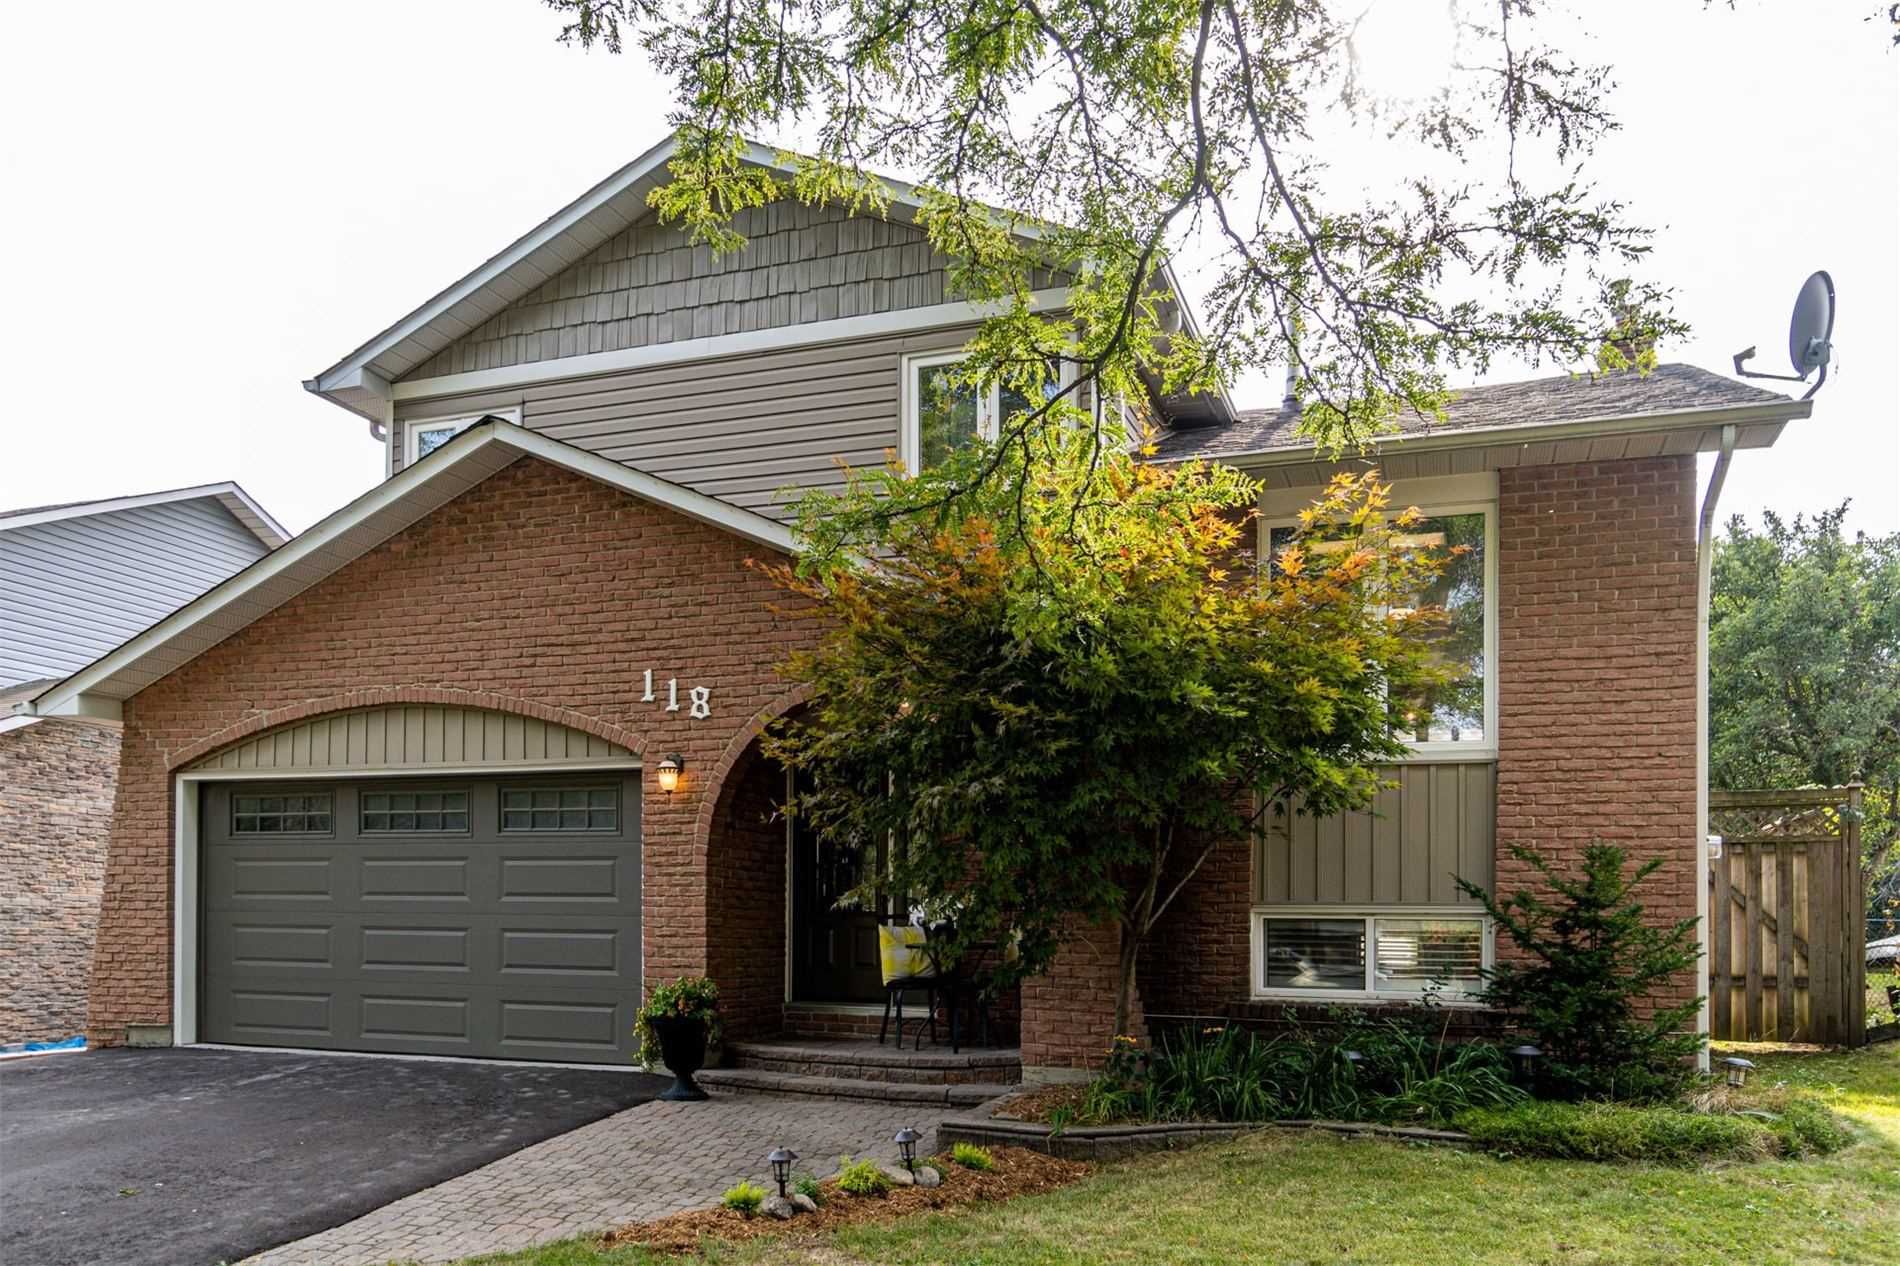 Main Photo: 118 Guthrie Crescent in Whitby: Lynde Creek House (Sidesplit 5) for sale : MLS®# E4896414